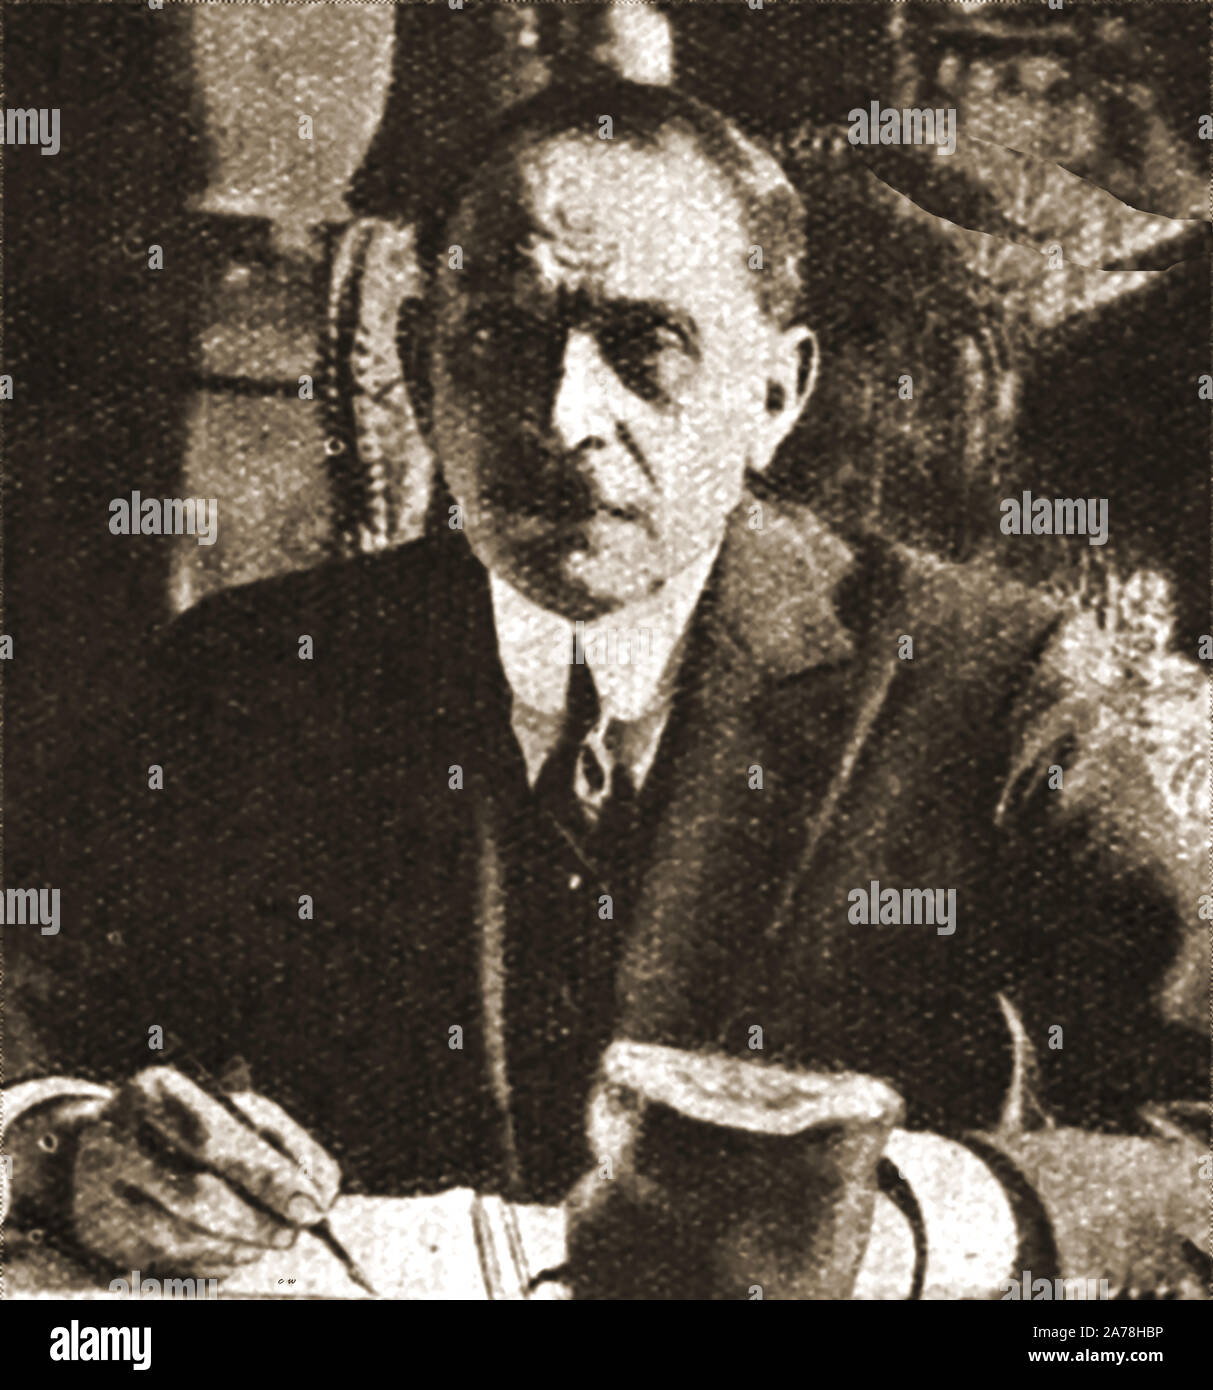 C1930s  Newspaper portrait of  Russian Surgeon  Dr Serge Voronof  (Serge Abrahamovitch Voronoff  1866-1951). The French surgeon of Russian descent . He became known as the Monkey Gland Man and developed a reputation for grafting monkey testicle tissue on to the testicles of men for purportedly therapeutic purposes. (By the time of his death he  was later widely ridiculed) Stock Photo